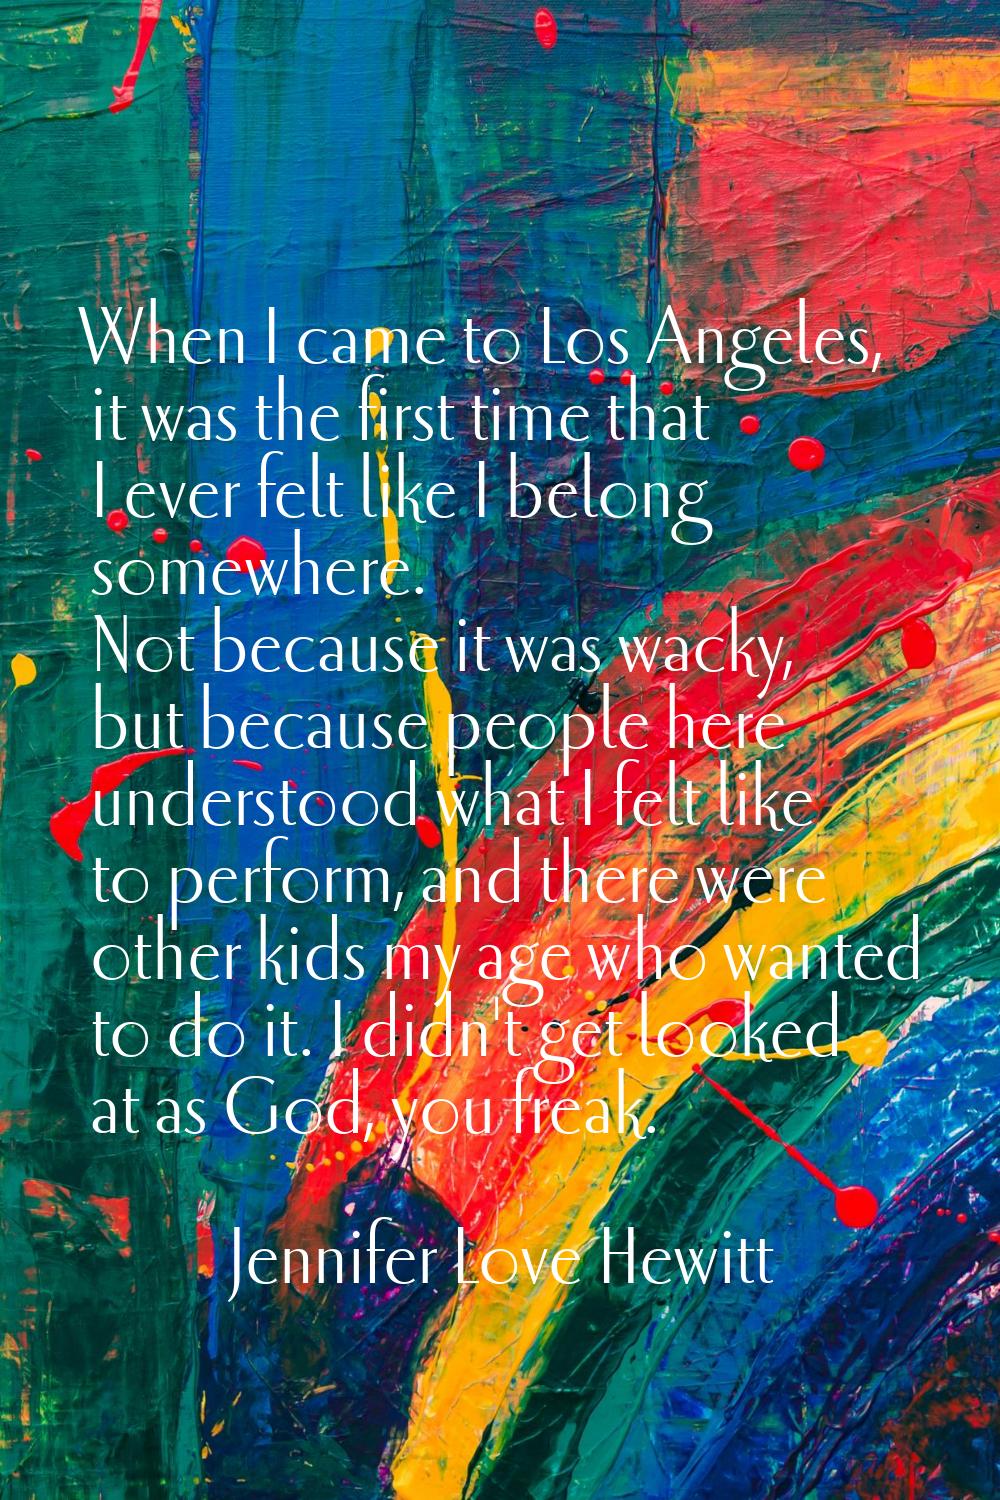 When I came to Los Angeles, it was the first time that I ever felt like I belong somewhere. Not bec